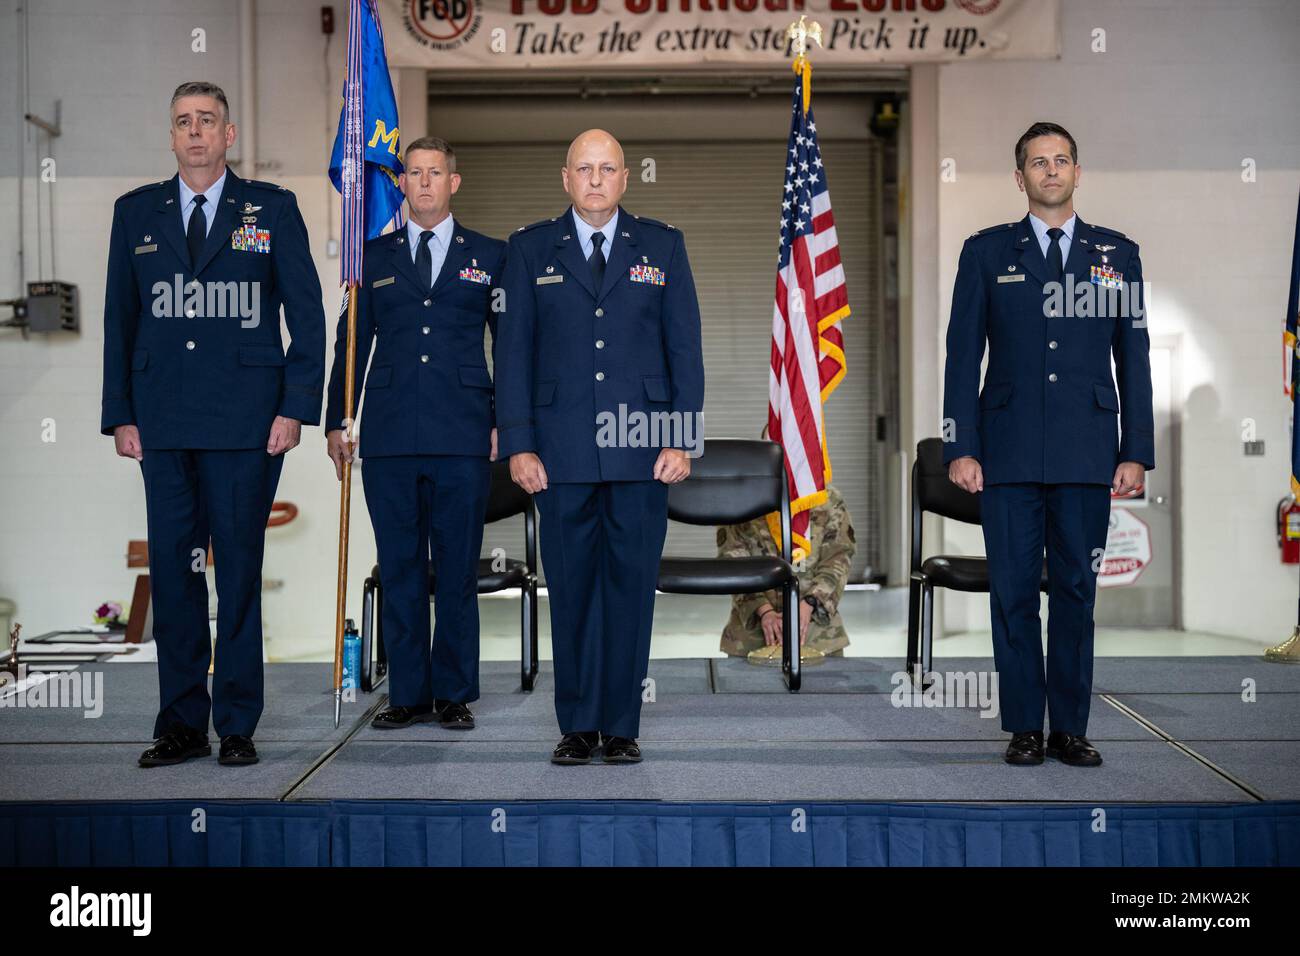 Col. Hans F. Otto, right, assumes command of the 123rd Medical Group during a ceremony at the Kentucky Air National Guard Base in Louisville, Ky., Sept. 11, 2022. Otto is replacing Col. Michael A. Cooper, second from right, who has led the group since 2014 and is retiring. Stock Photo